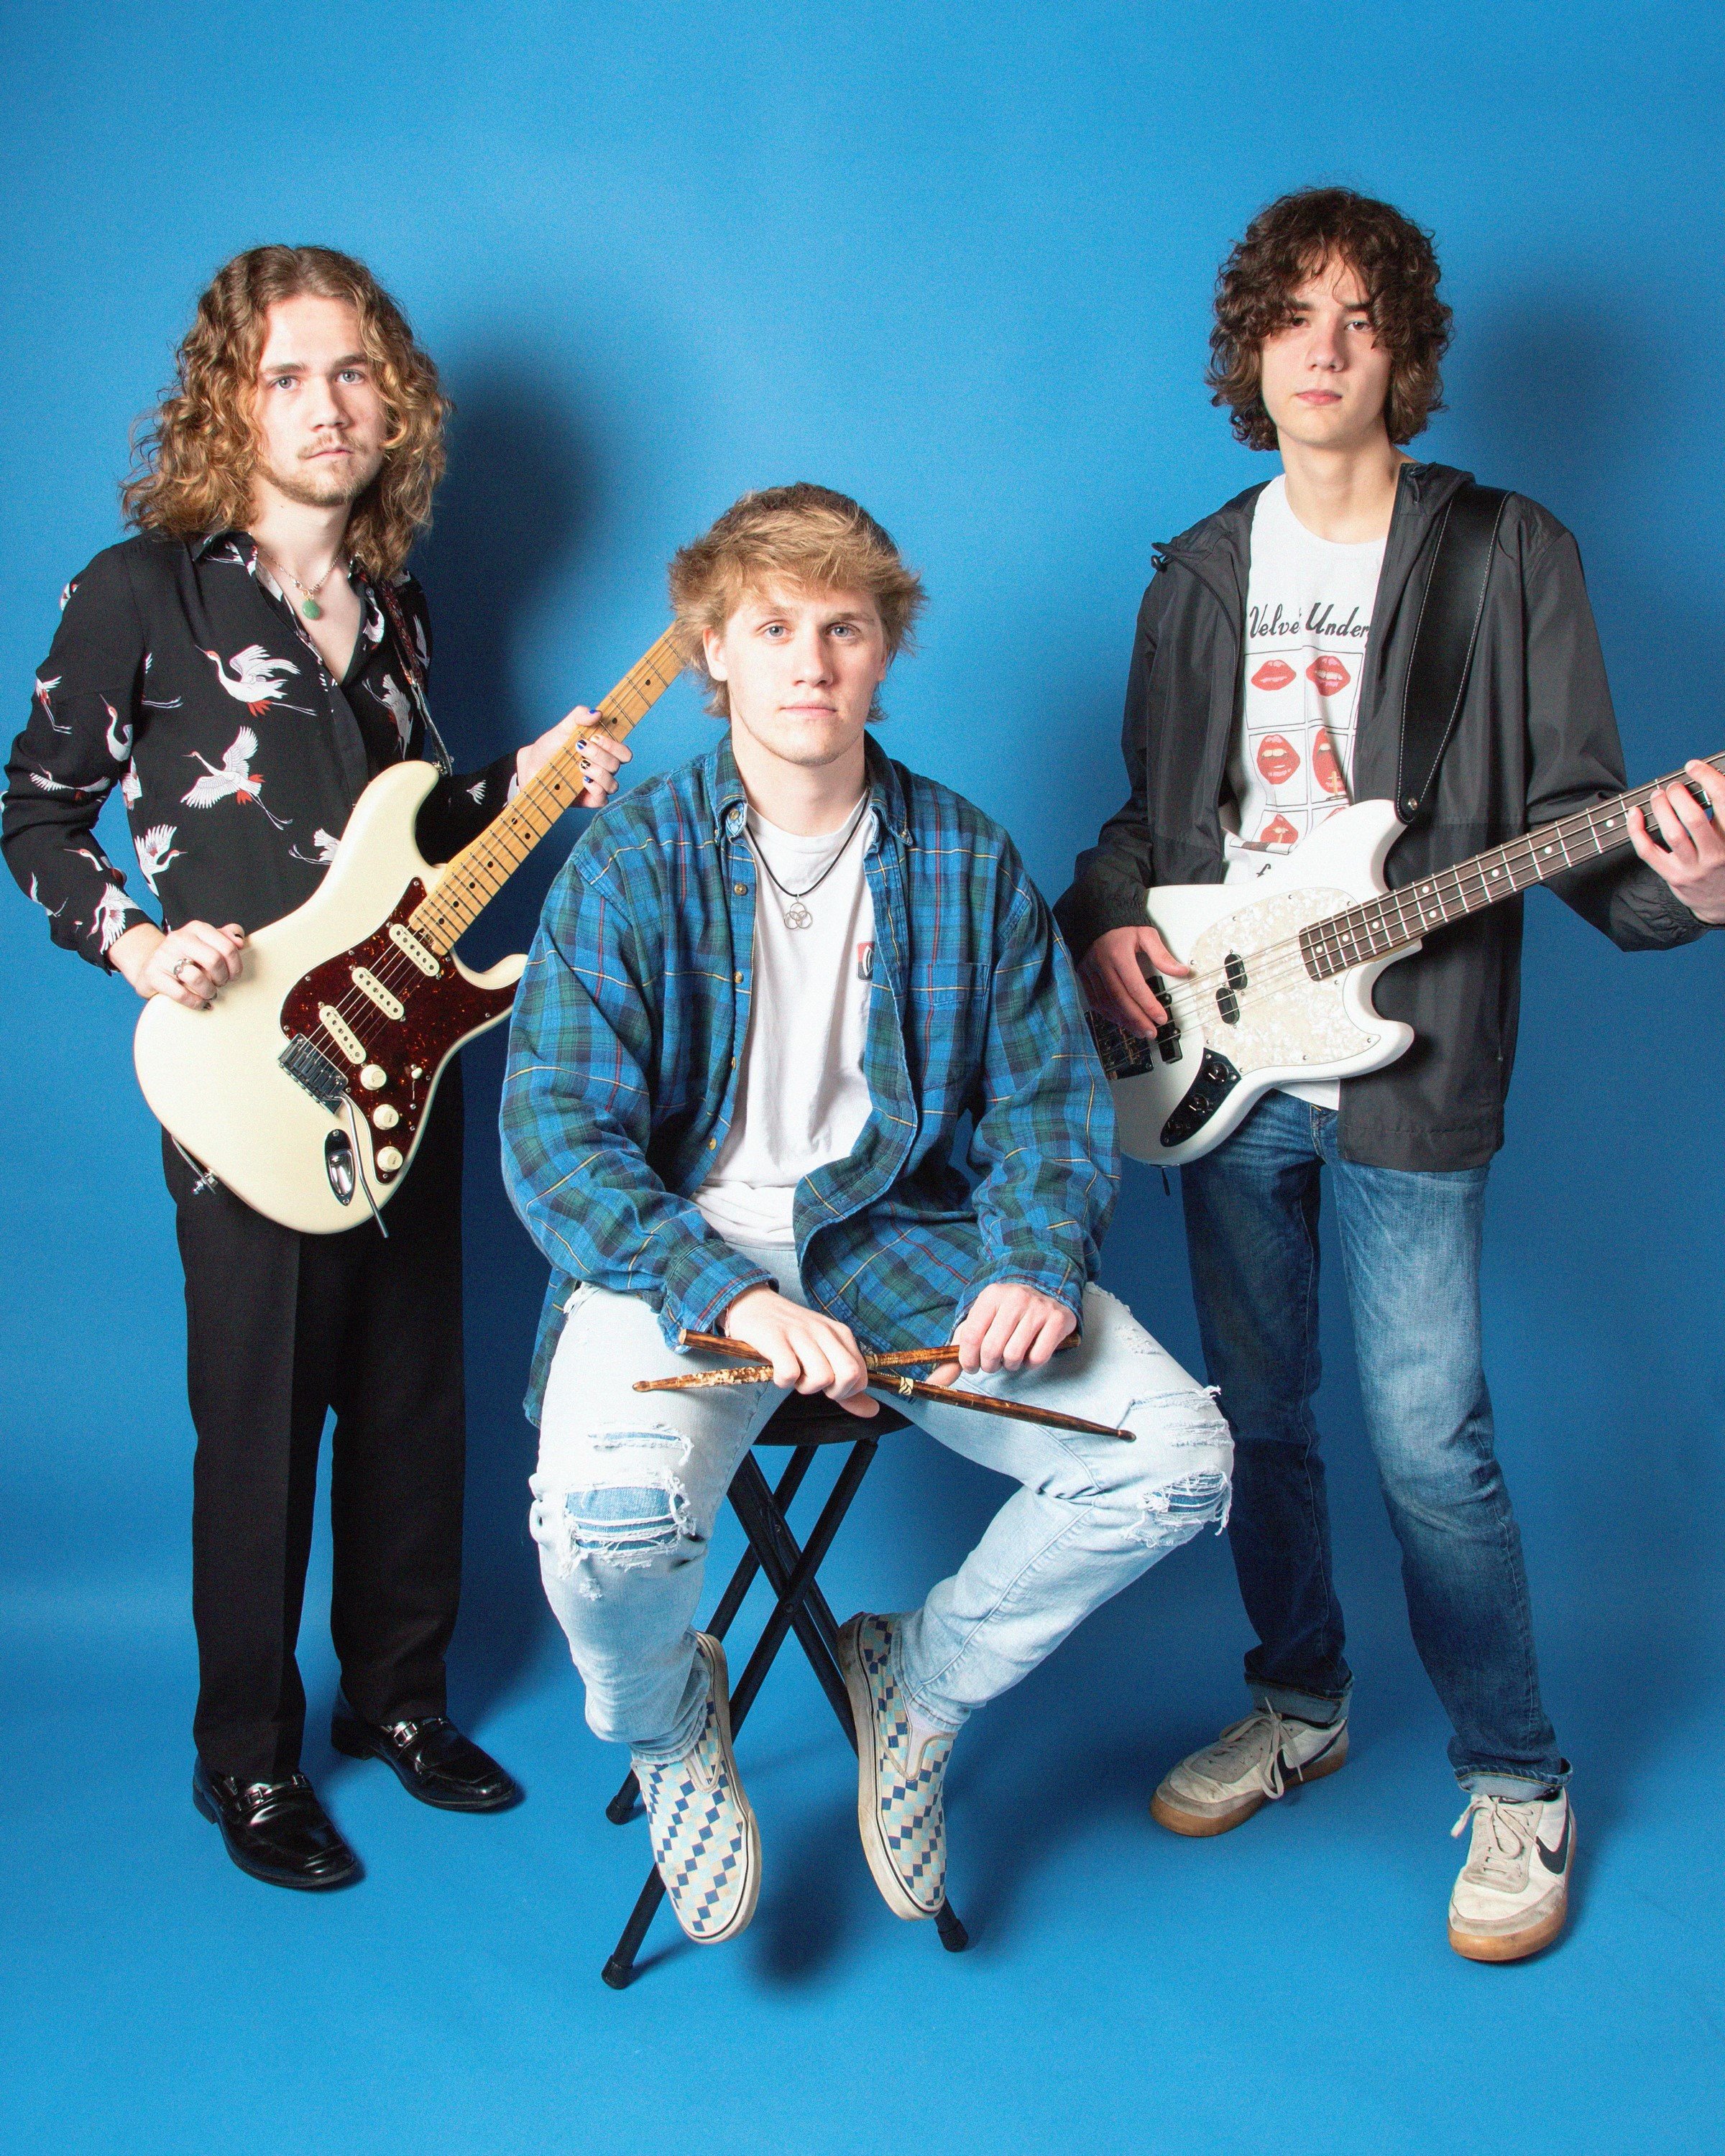  Keep the Eleven is a three piece garage rock trio from the Chicago suburbs. Their music is leading a brand-new resurgence of rock music that speaks to all generations. One critic writes: "The band as a whole has a youthful, casual vibe while at the 